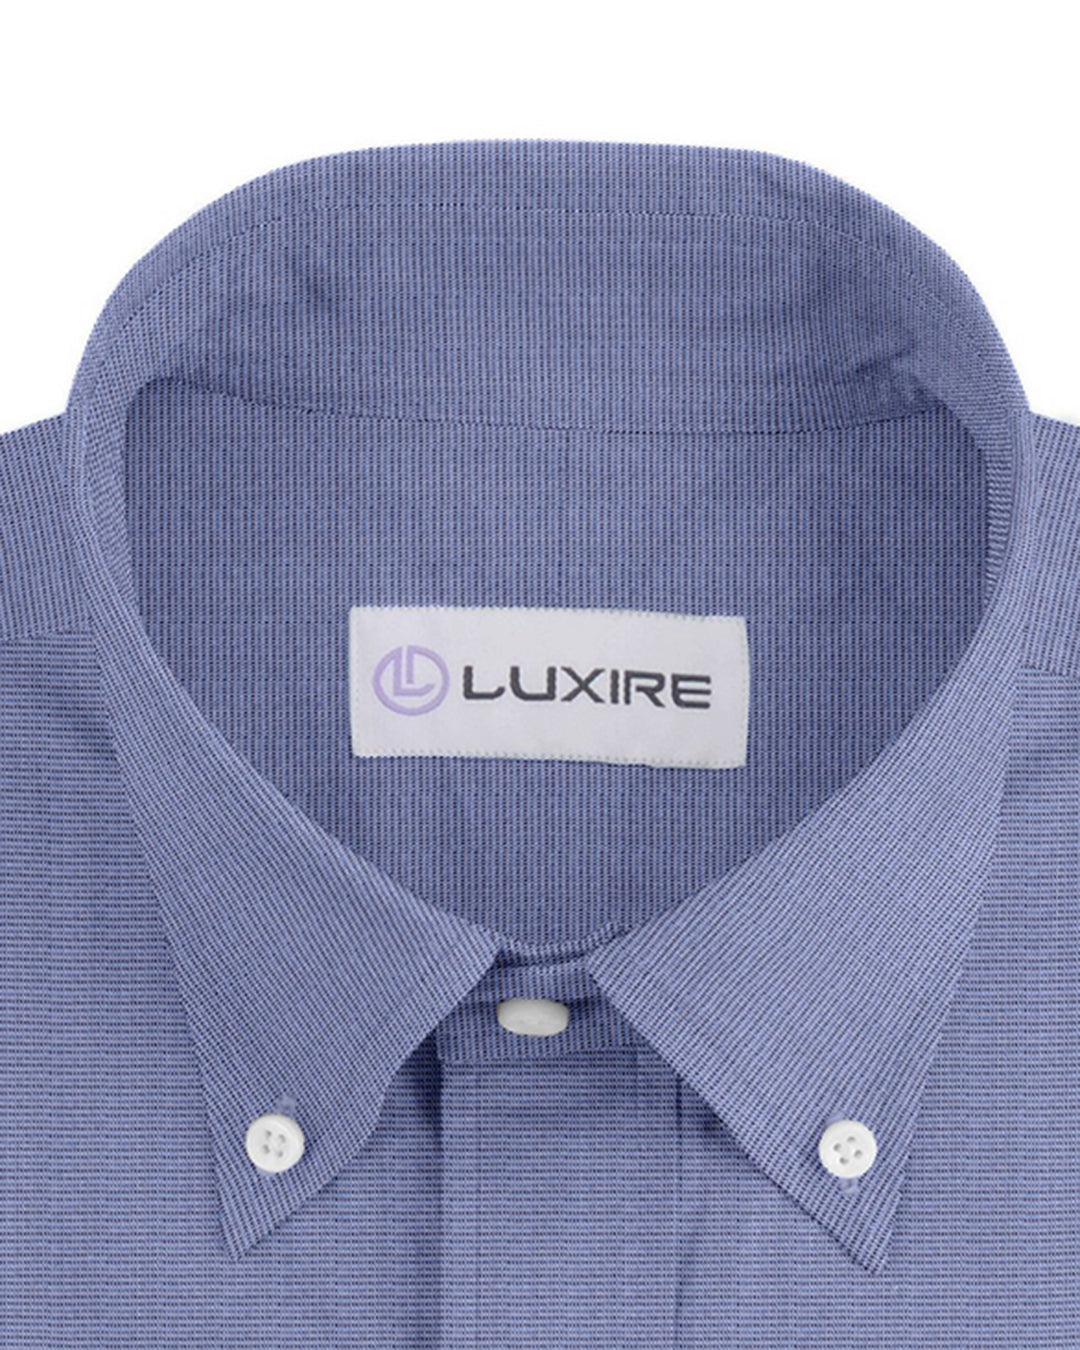 Collar of the custom linen shirt for men in mid blue chambray by Luxire Clothing